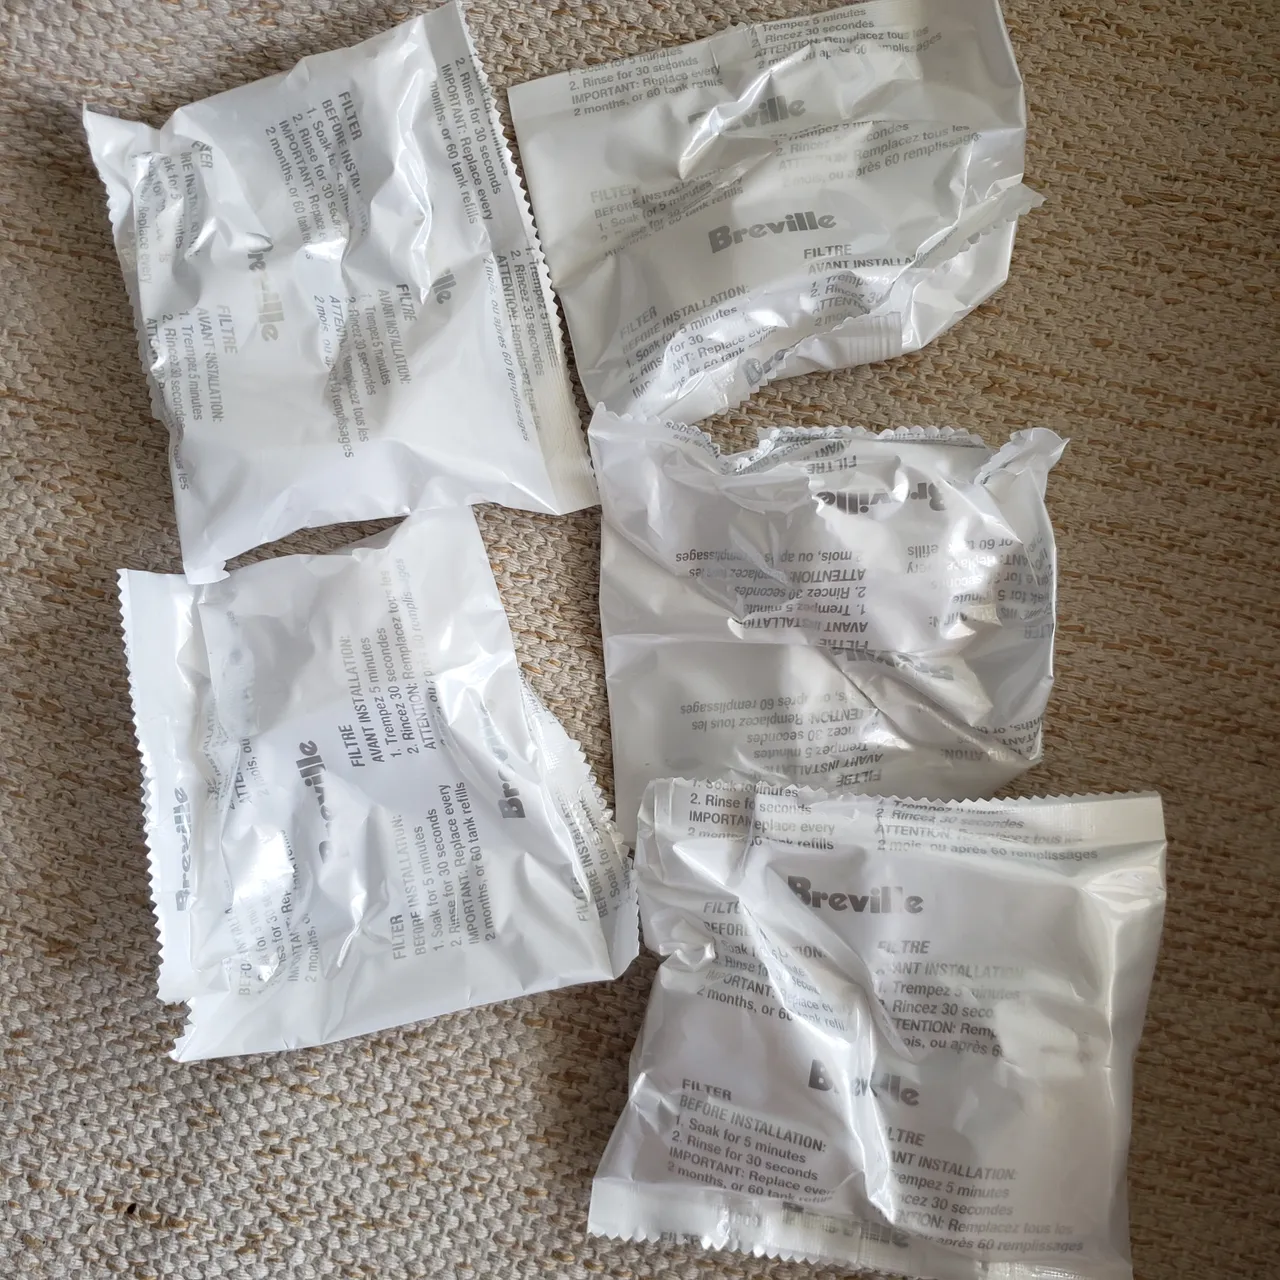 Breville replacement water filters photo 3